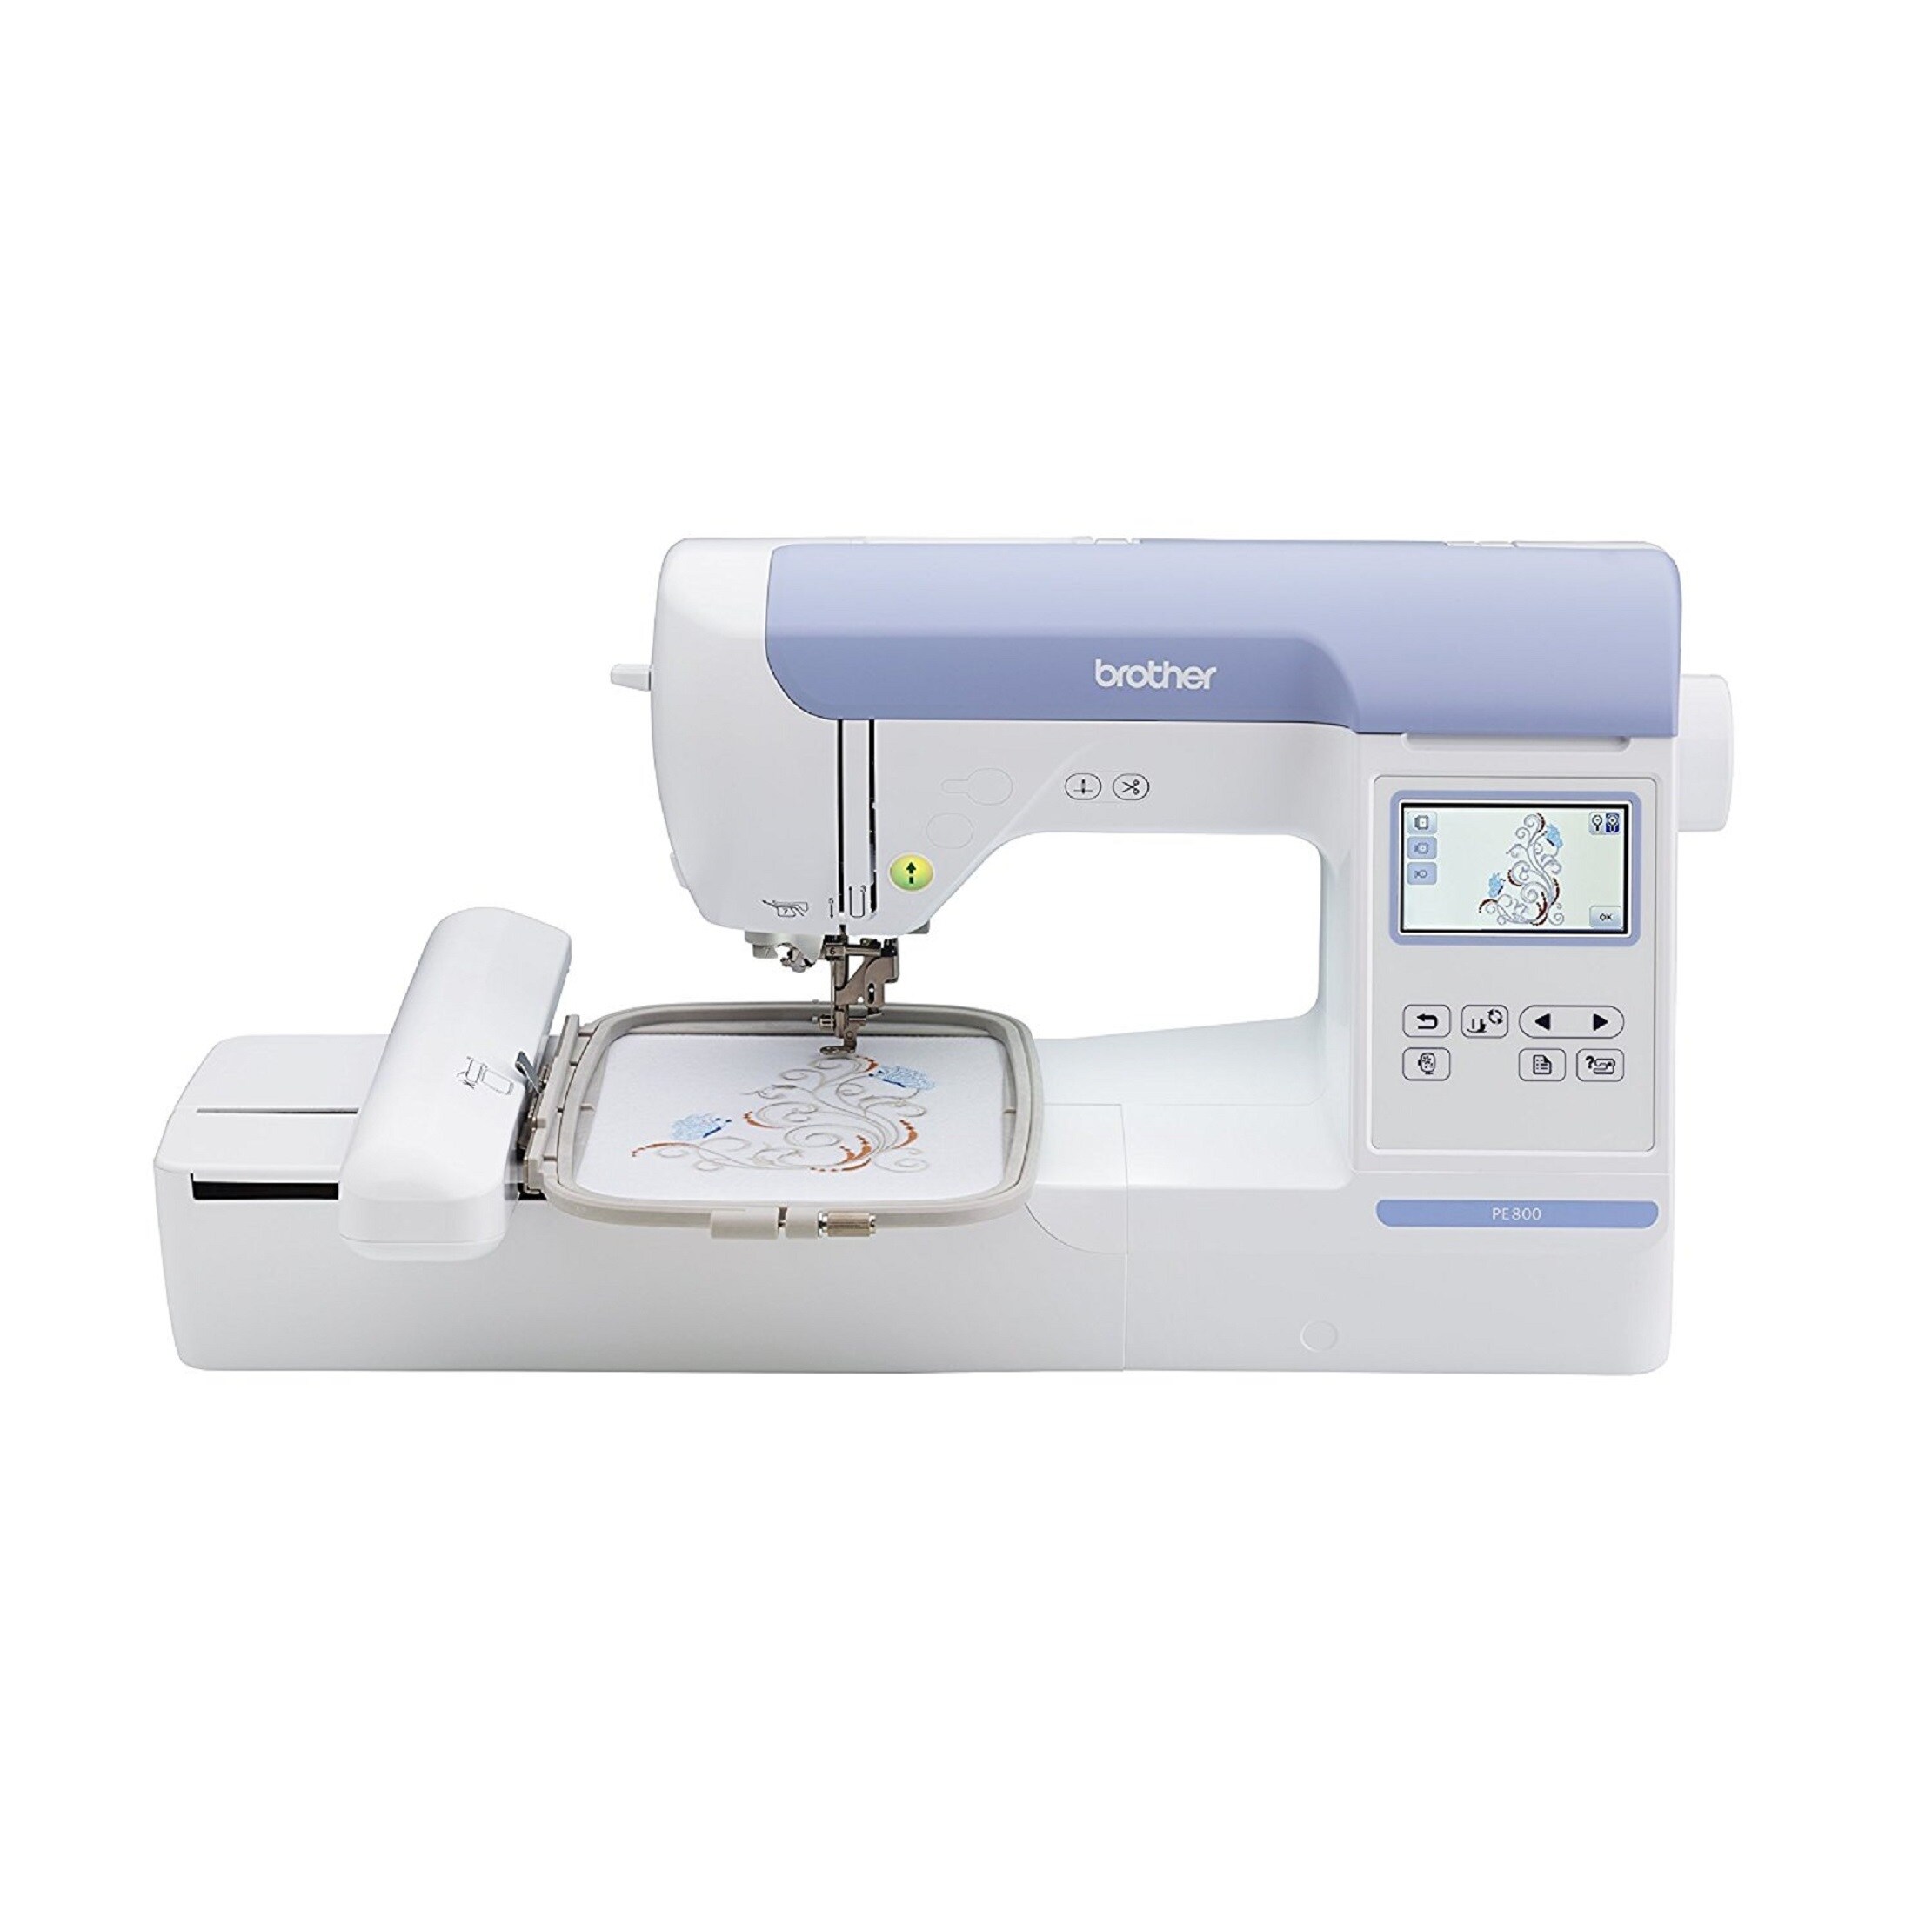 YUNLAIGOTOP Sewing and Embroidery Machine, 2-In-1 Embroidery Machine with  Large LCD Touch Screen, 75 Designs, 4x9.2 Embroidery Area, Computerized